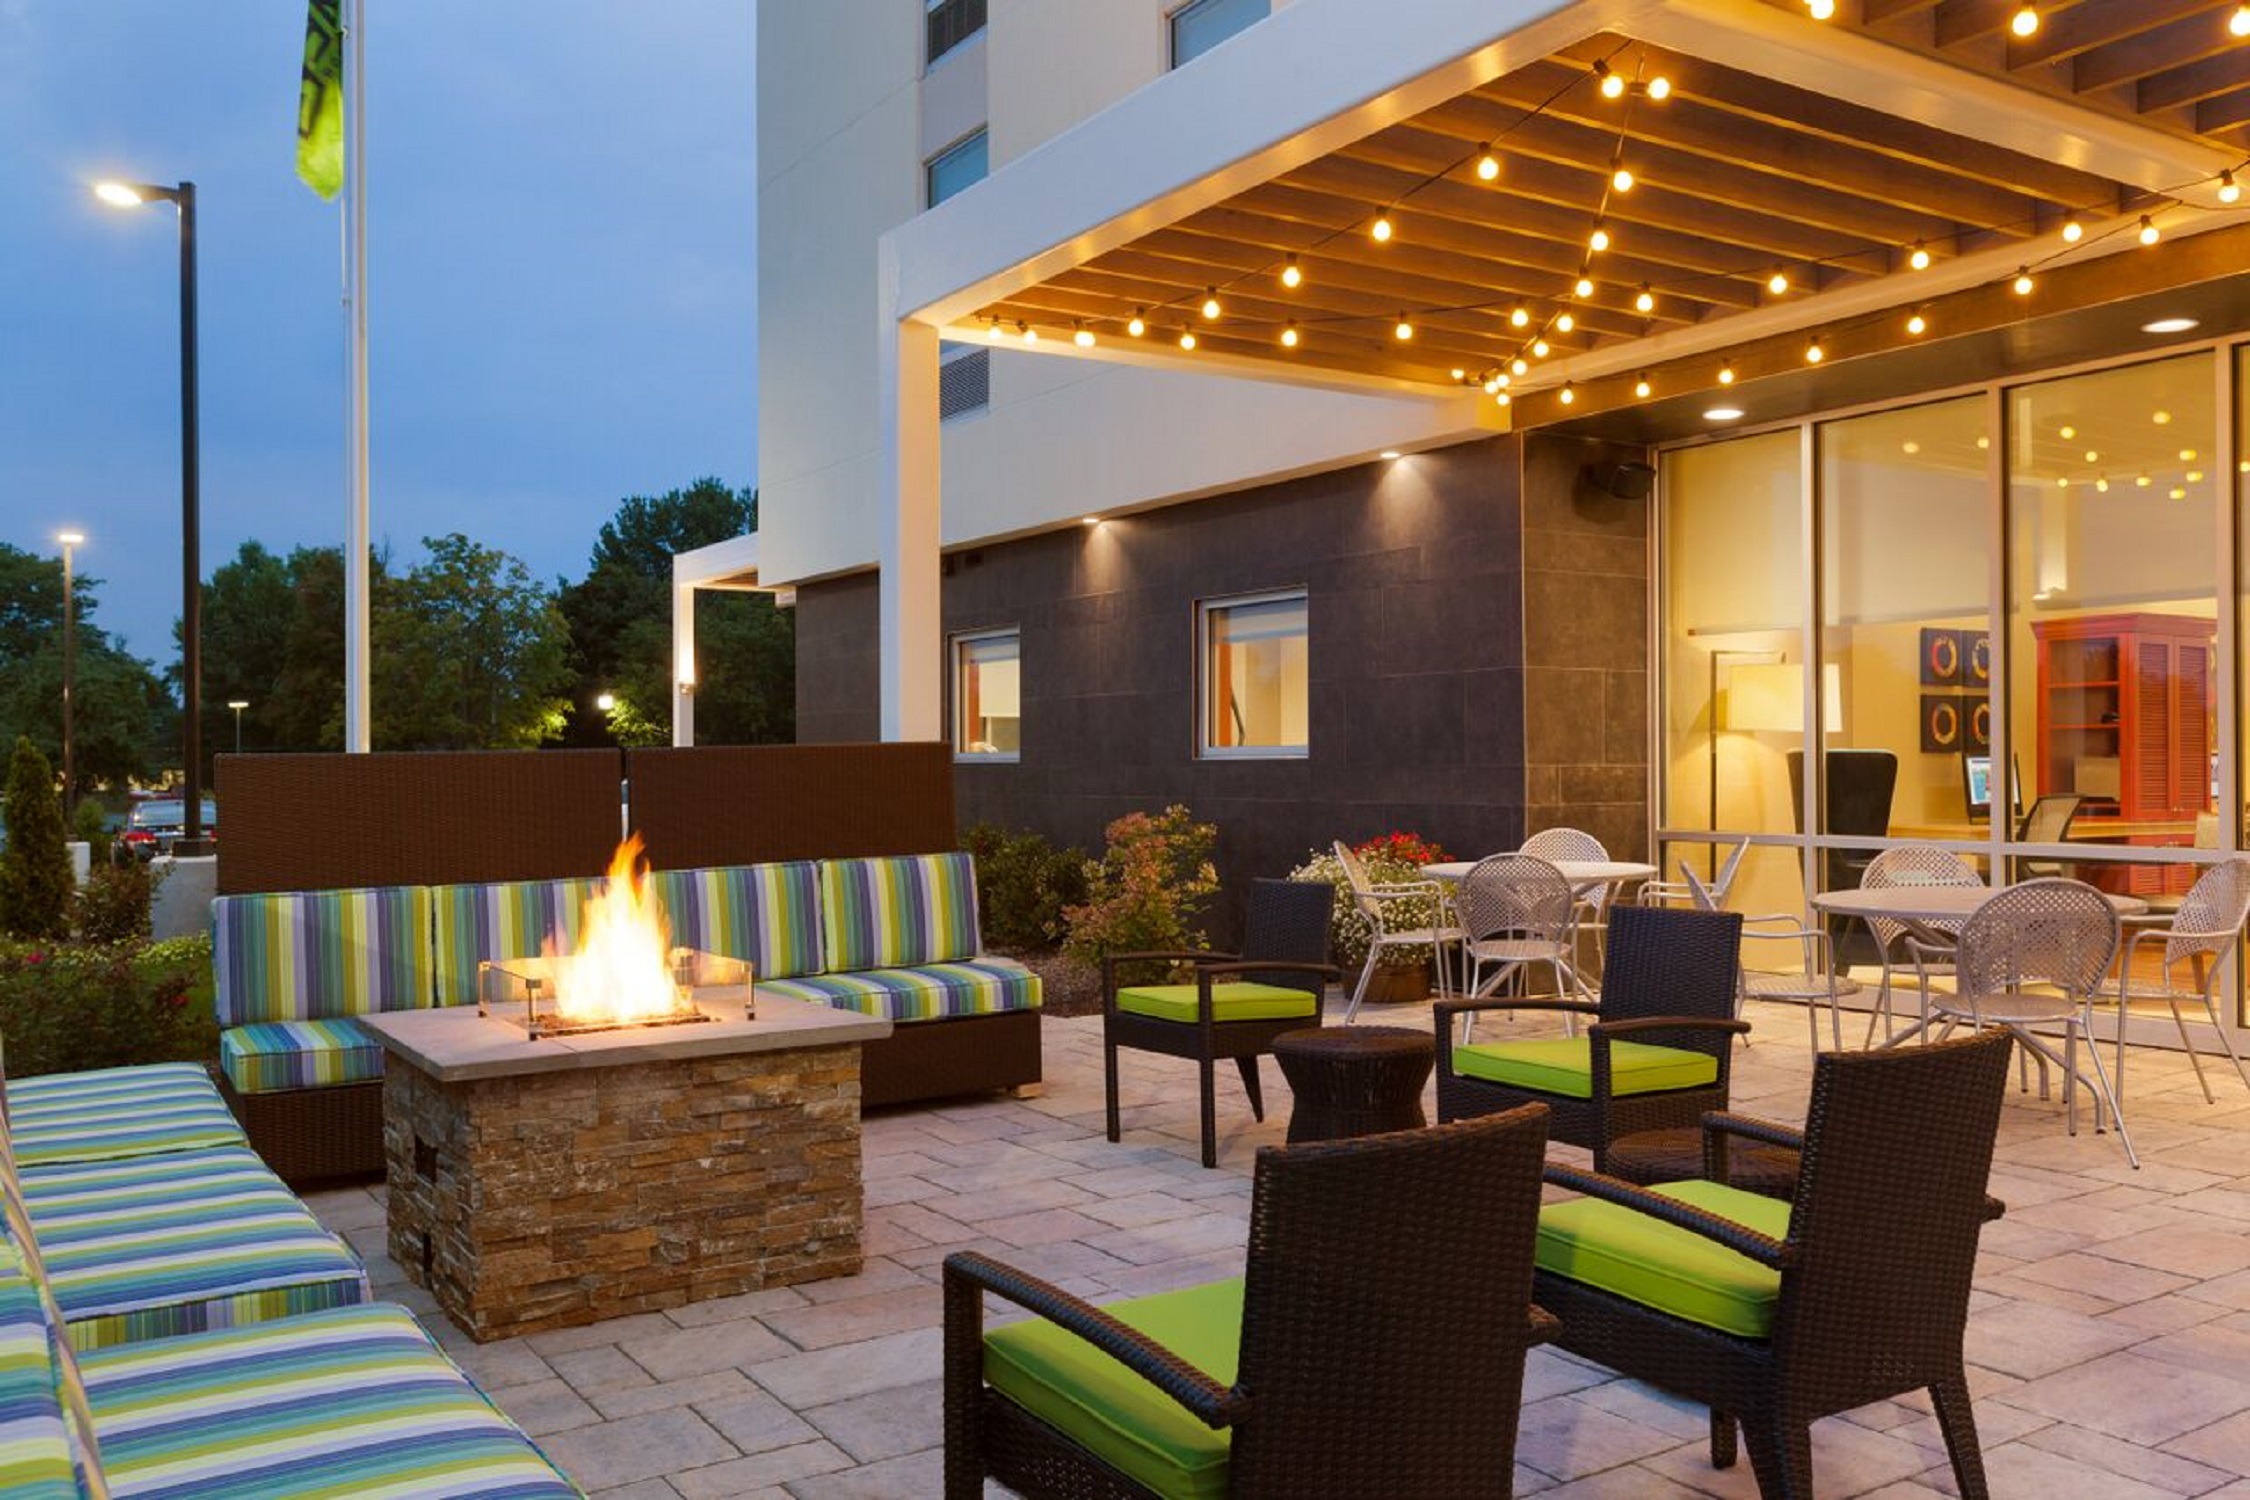 Outdoor Fire Pit & Seating Area